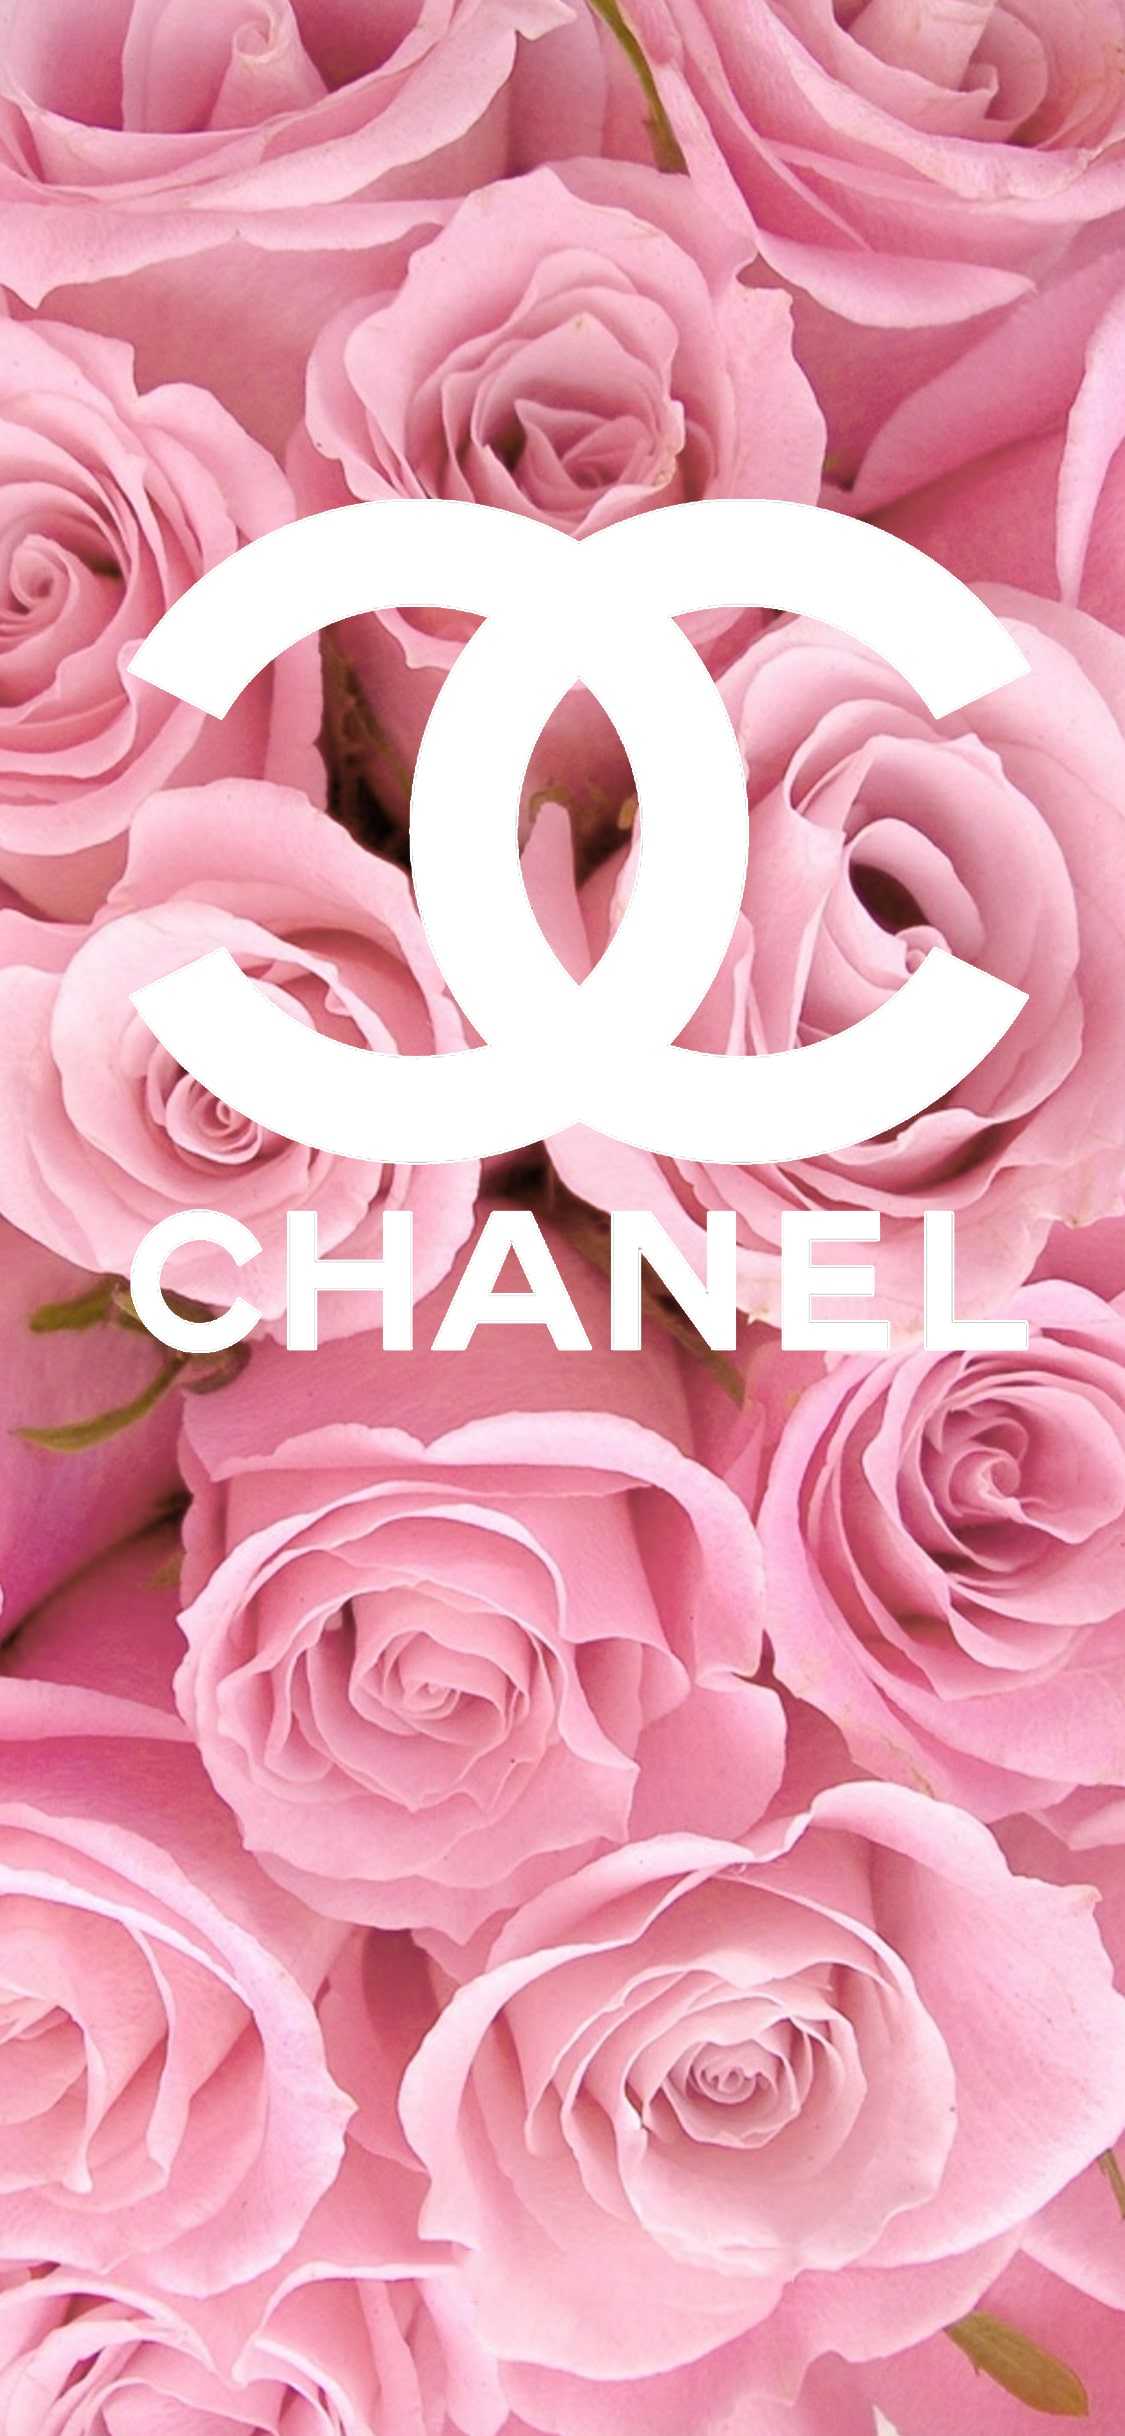 Chanel Wallpapers Backgrounds Free Download Pixelstal - vrogue.co